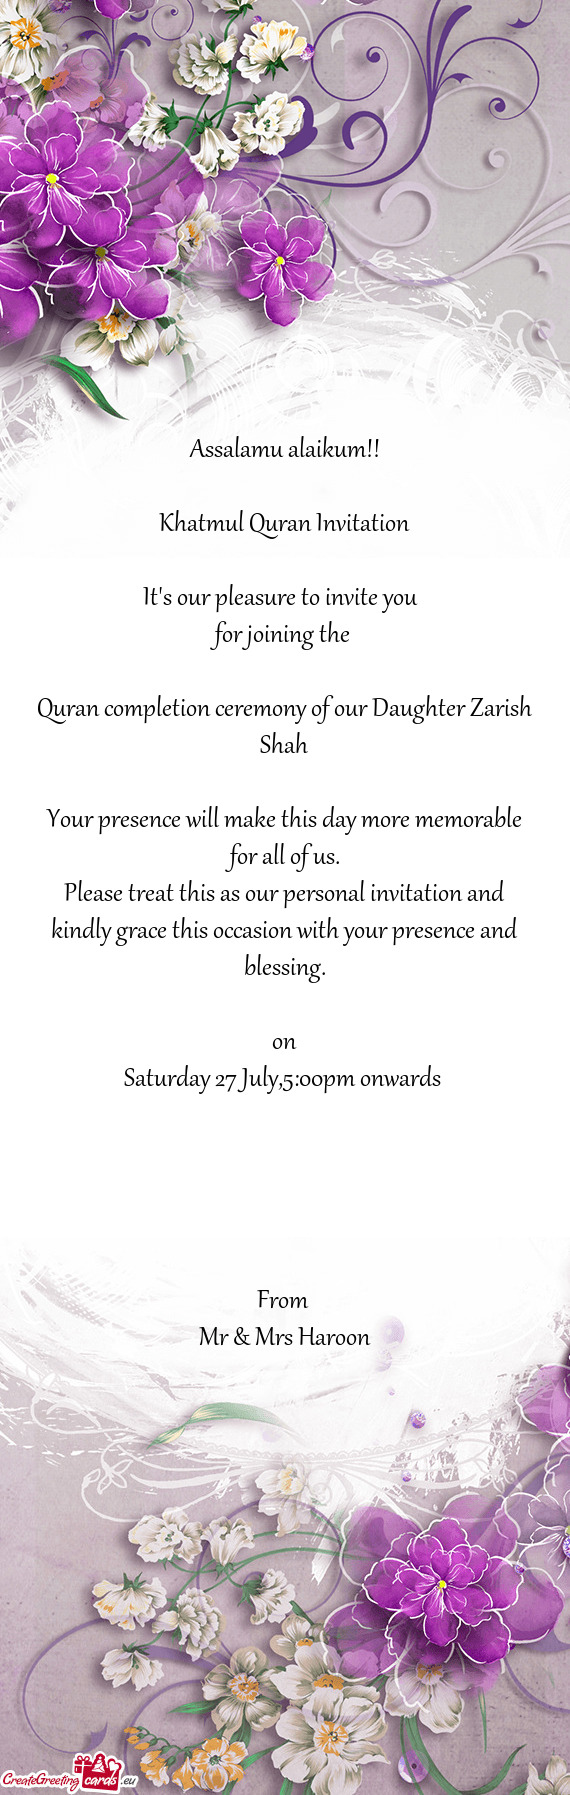 Quran completion ceremony of our Daughter Zarish Shah